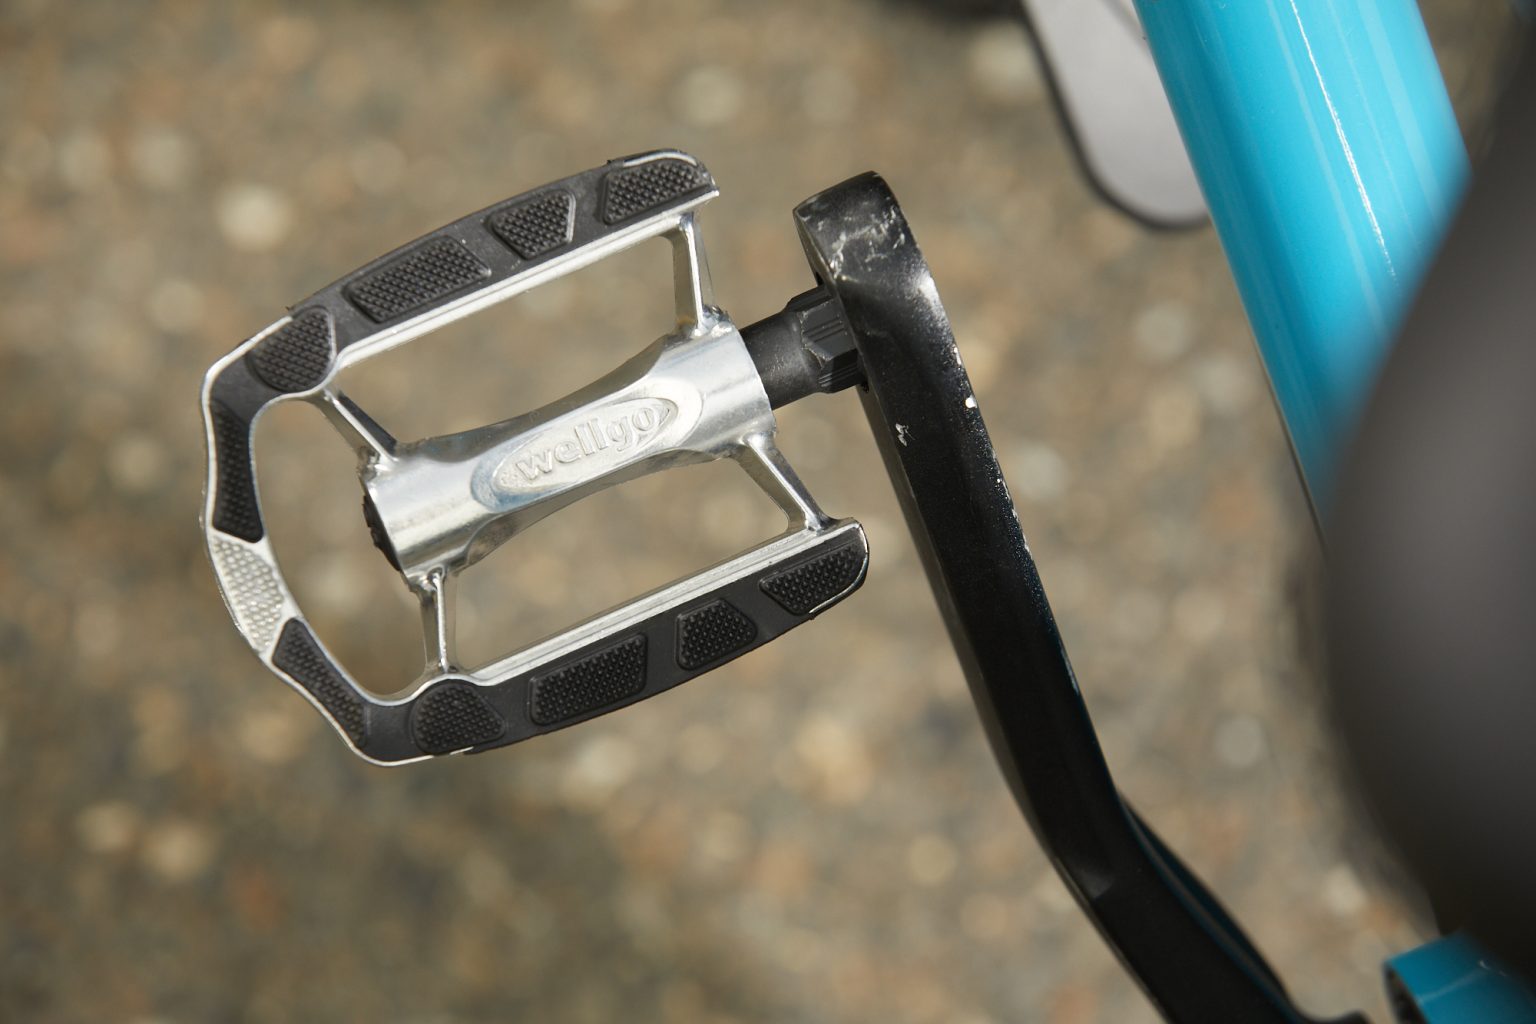 Bicycle Repair How to Fix Pedal Problems